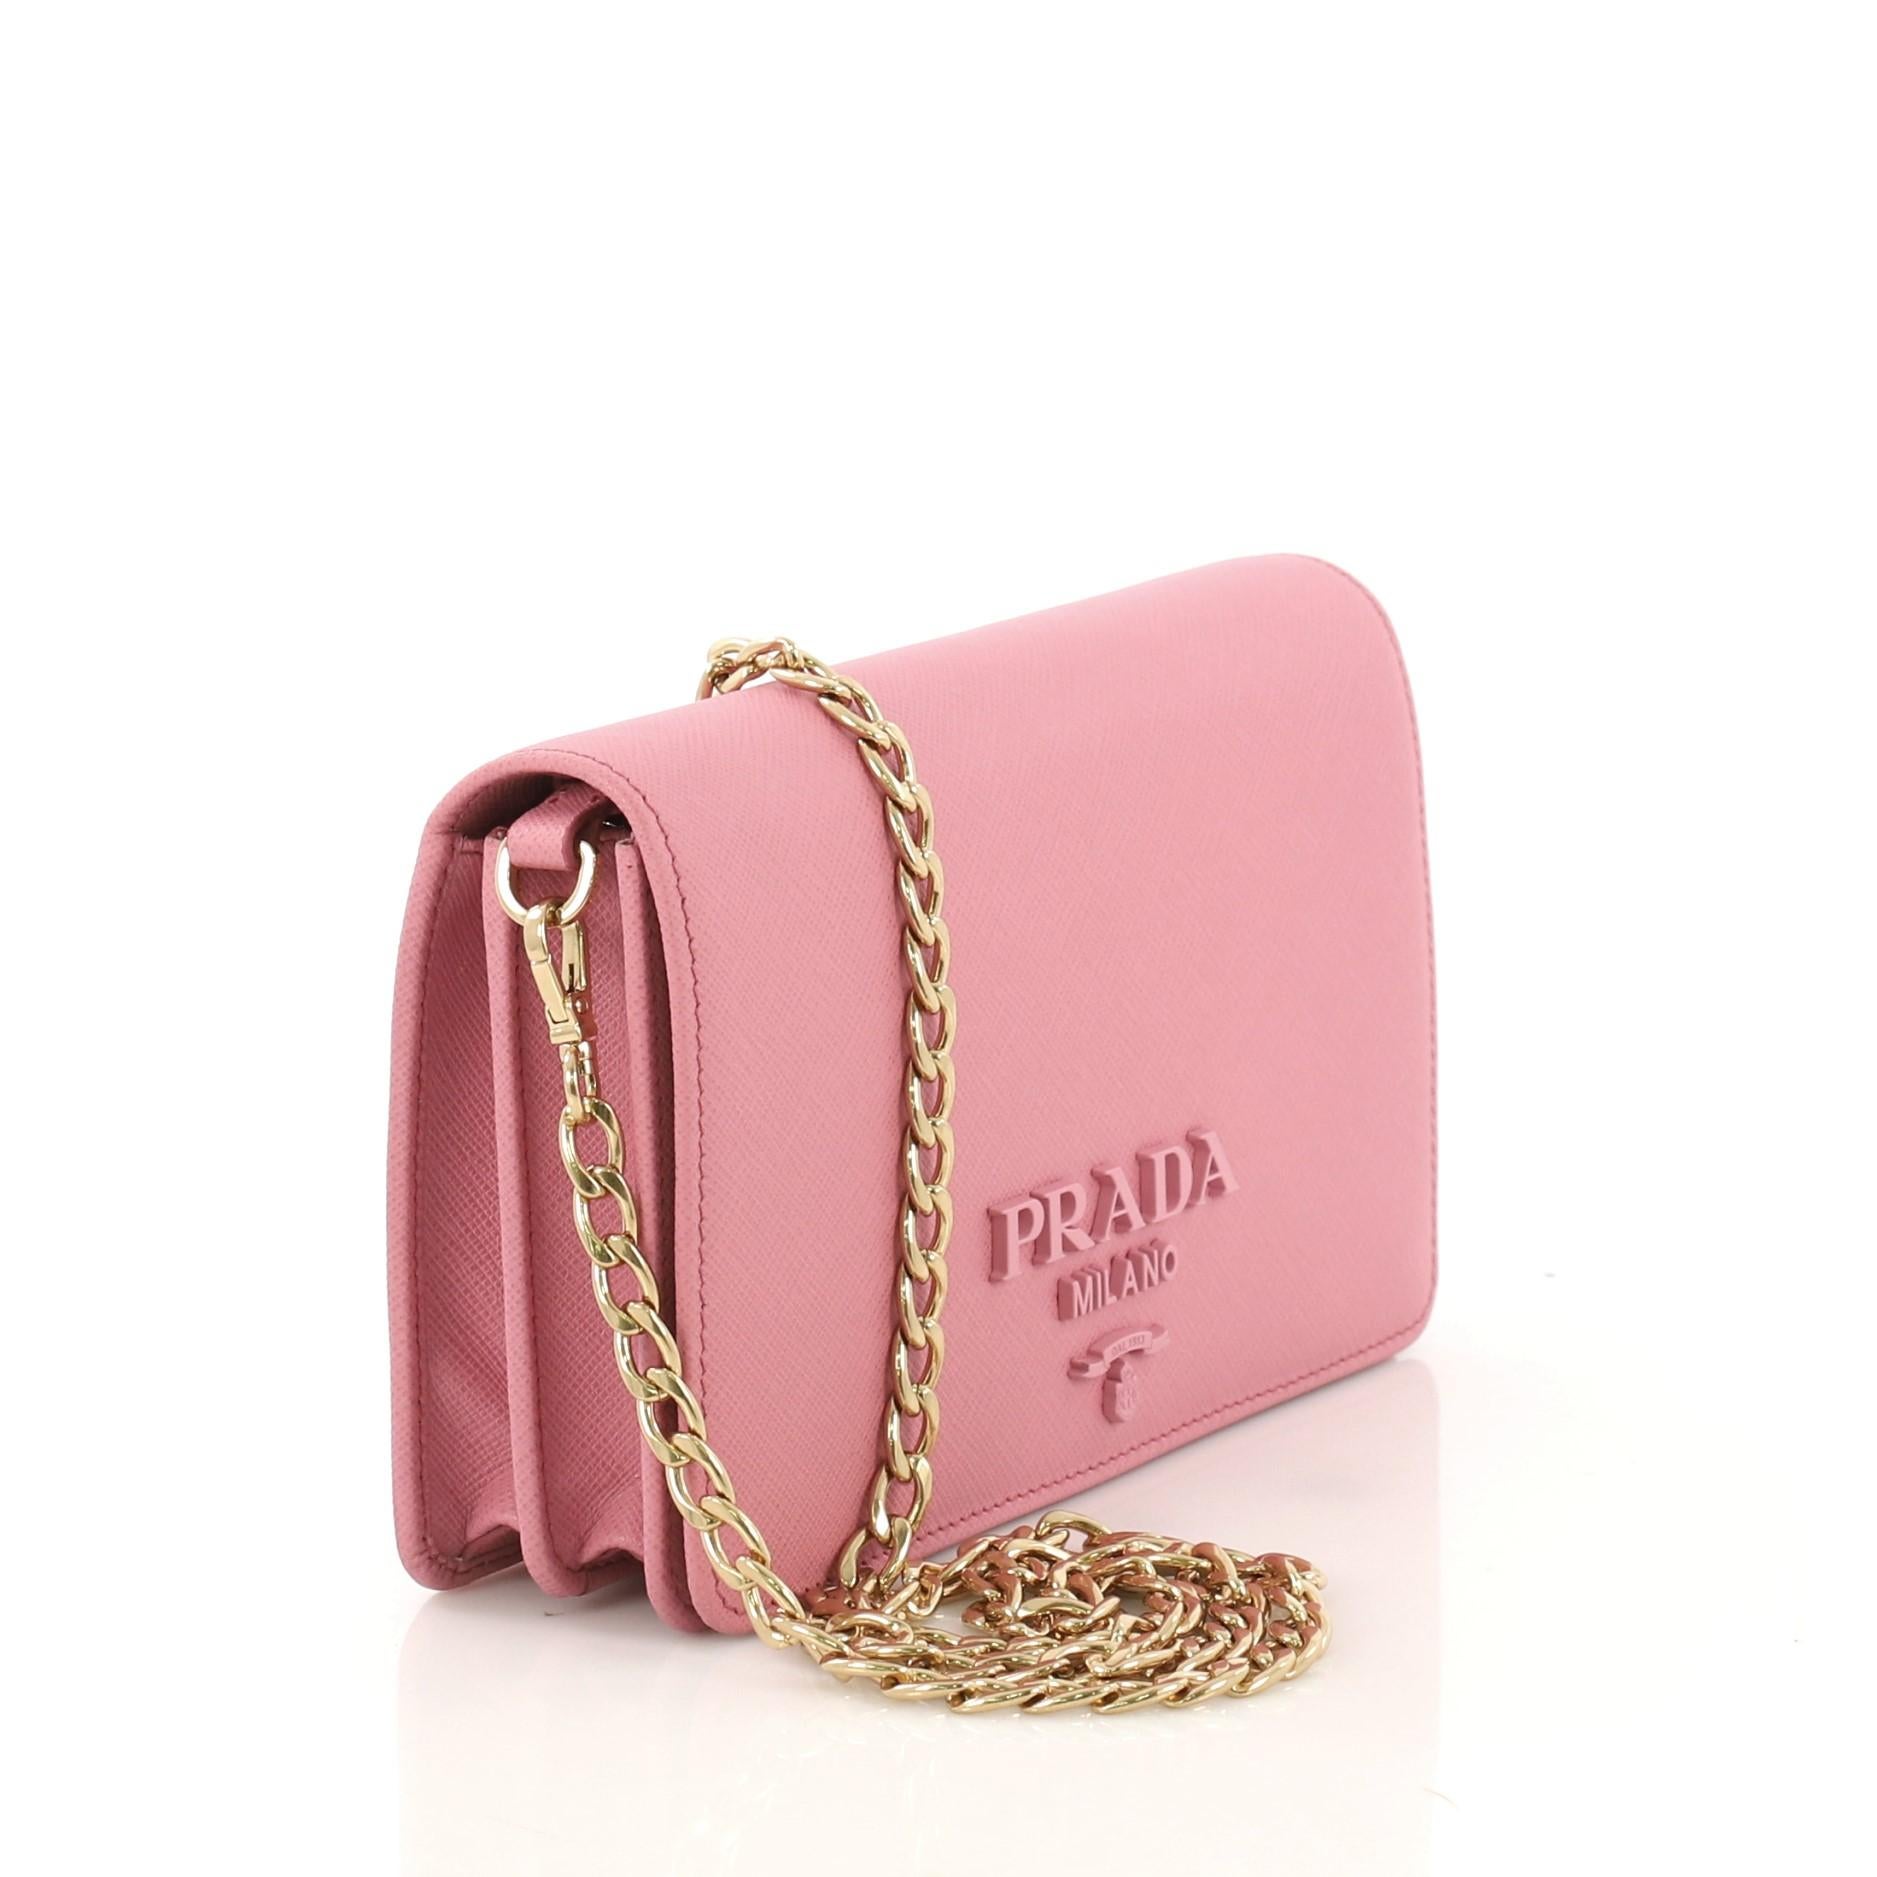 This Prada Chain Flap Bag Saffiano Leather Small, crafted in pink saffiano leather, features chain link shoulder strap, front flap with metal Prada logo and gold-tone hardware. Its magnetic snap closure opens to a red leather interior with a middle